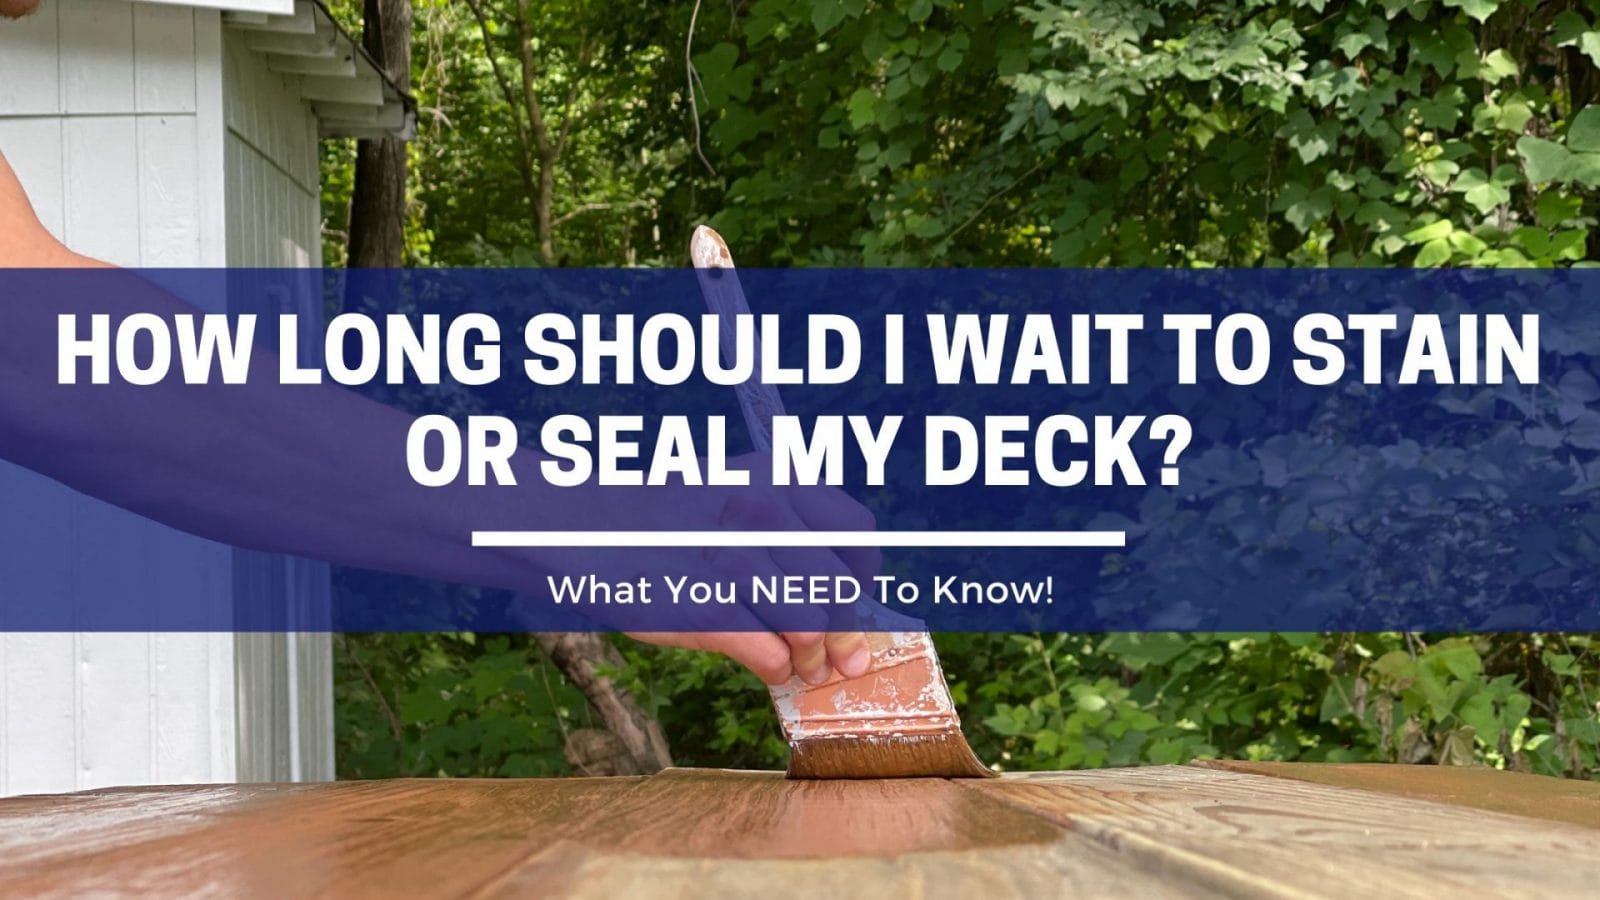 How long should I wait to stain my deck or fence?